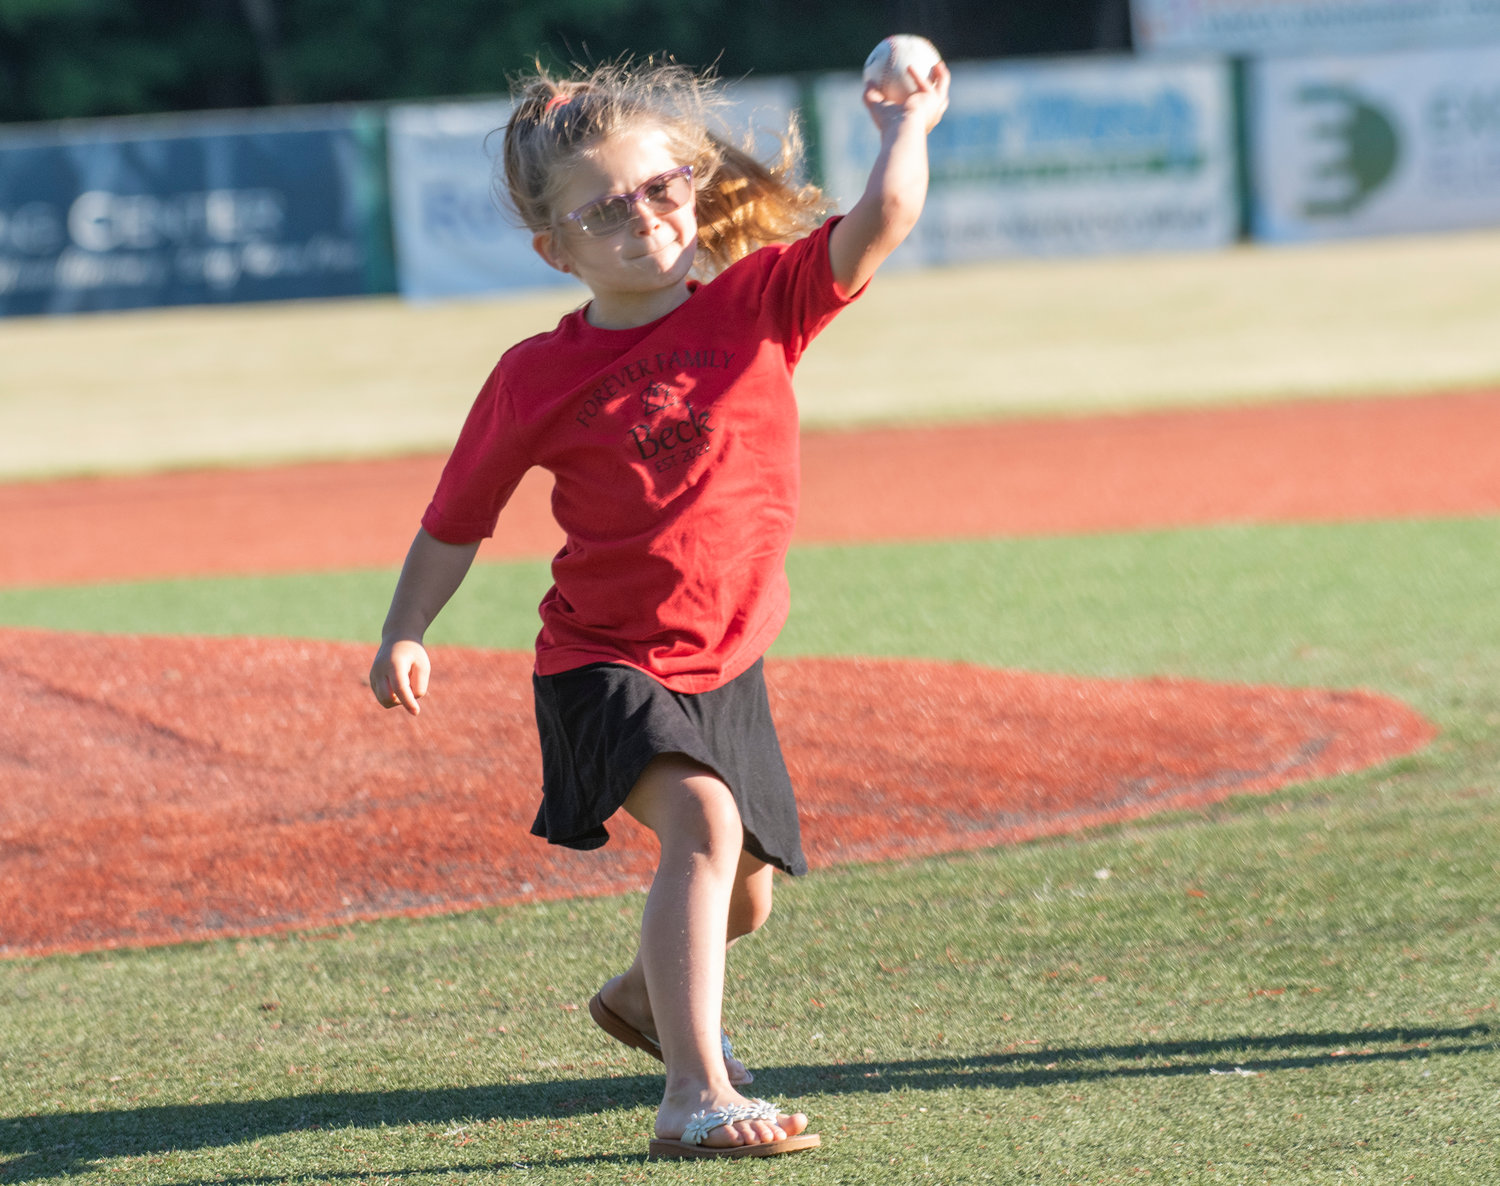 Audrianna Beck looks like a crafty left-handed pitcher on her throw to home plate, honored with throwing out the first pitch at Tuesday, June 14, 2022 Amsterdam Mohawks game at Shuttleworth Park in Amsterdam.